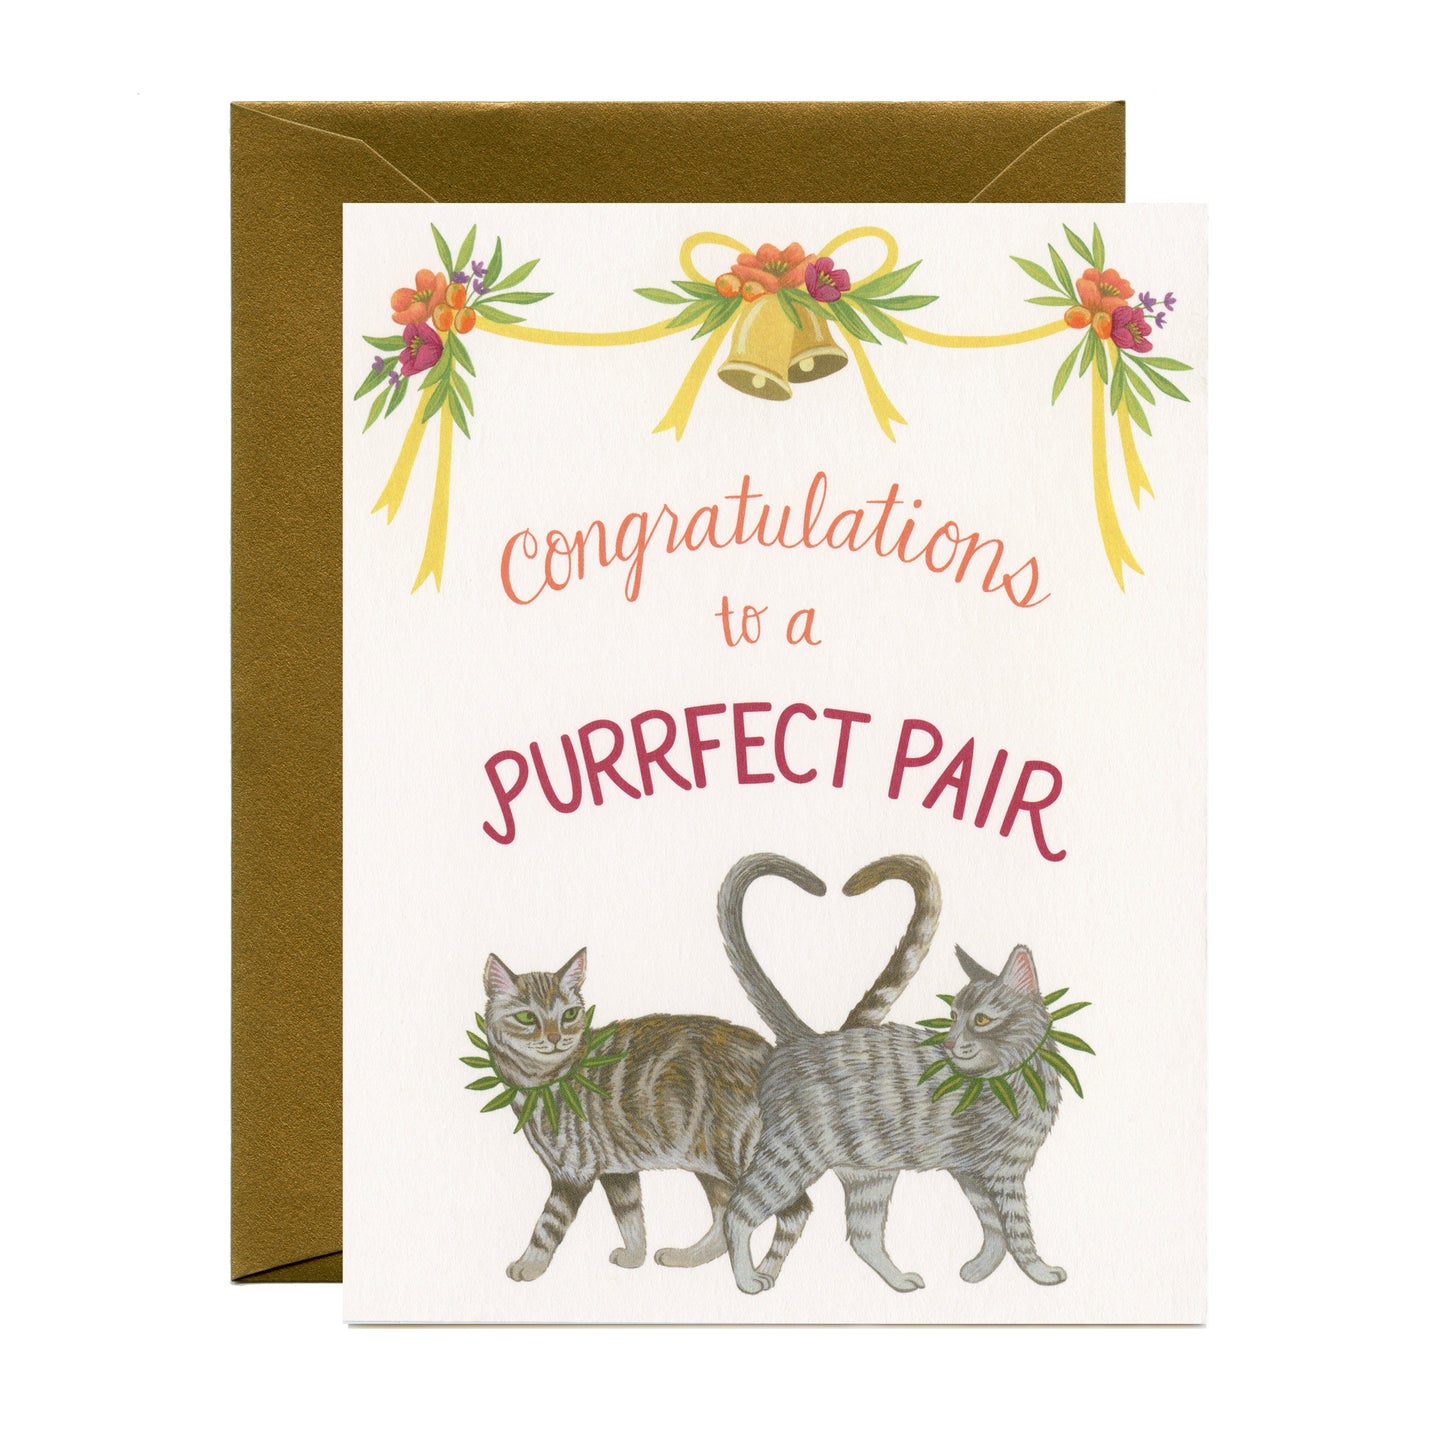 PURRFECT PAIR OF CATS - WEDDING GREETING CARD